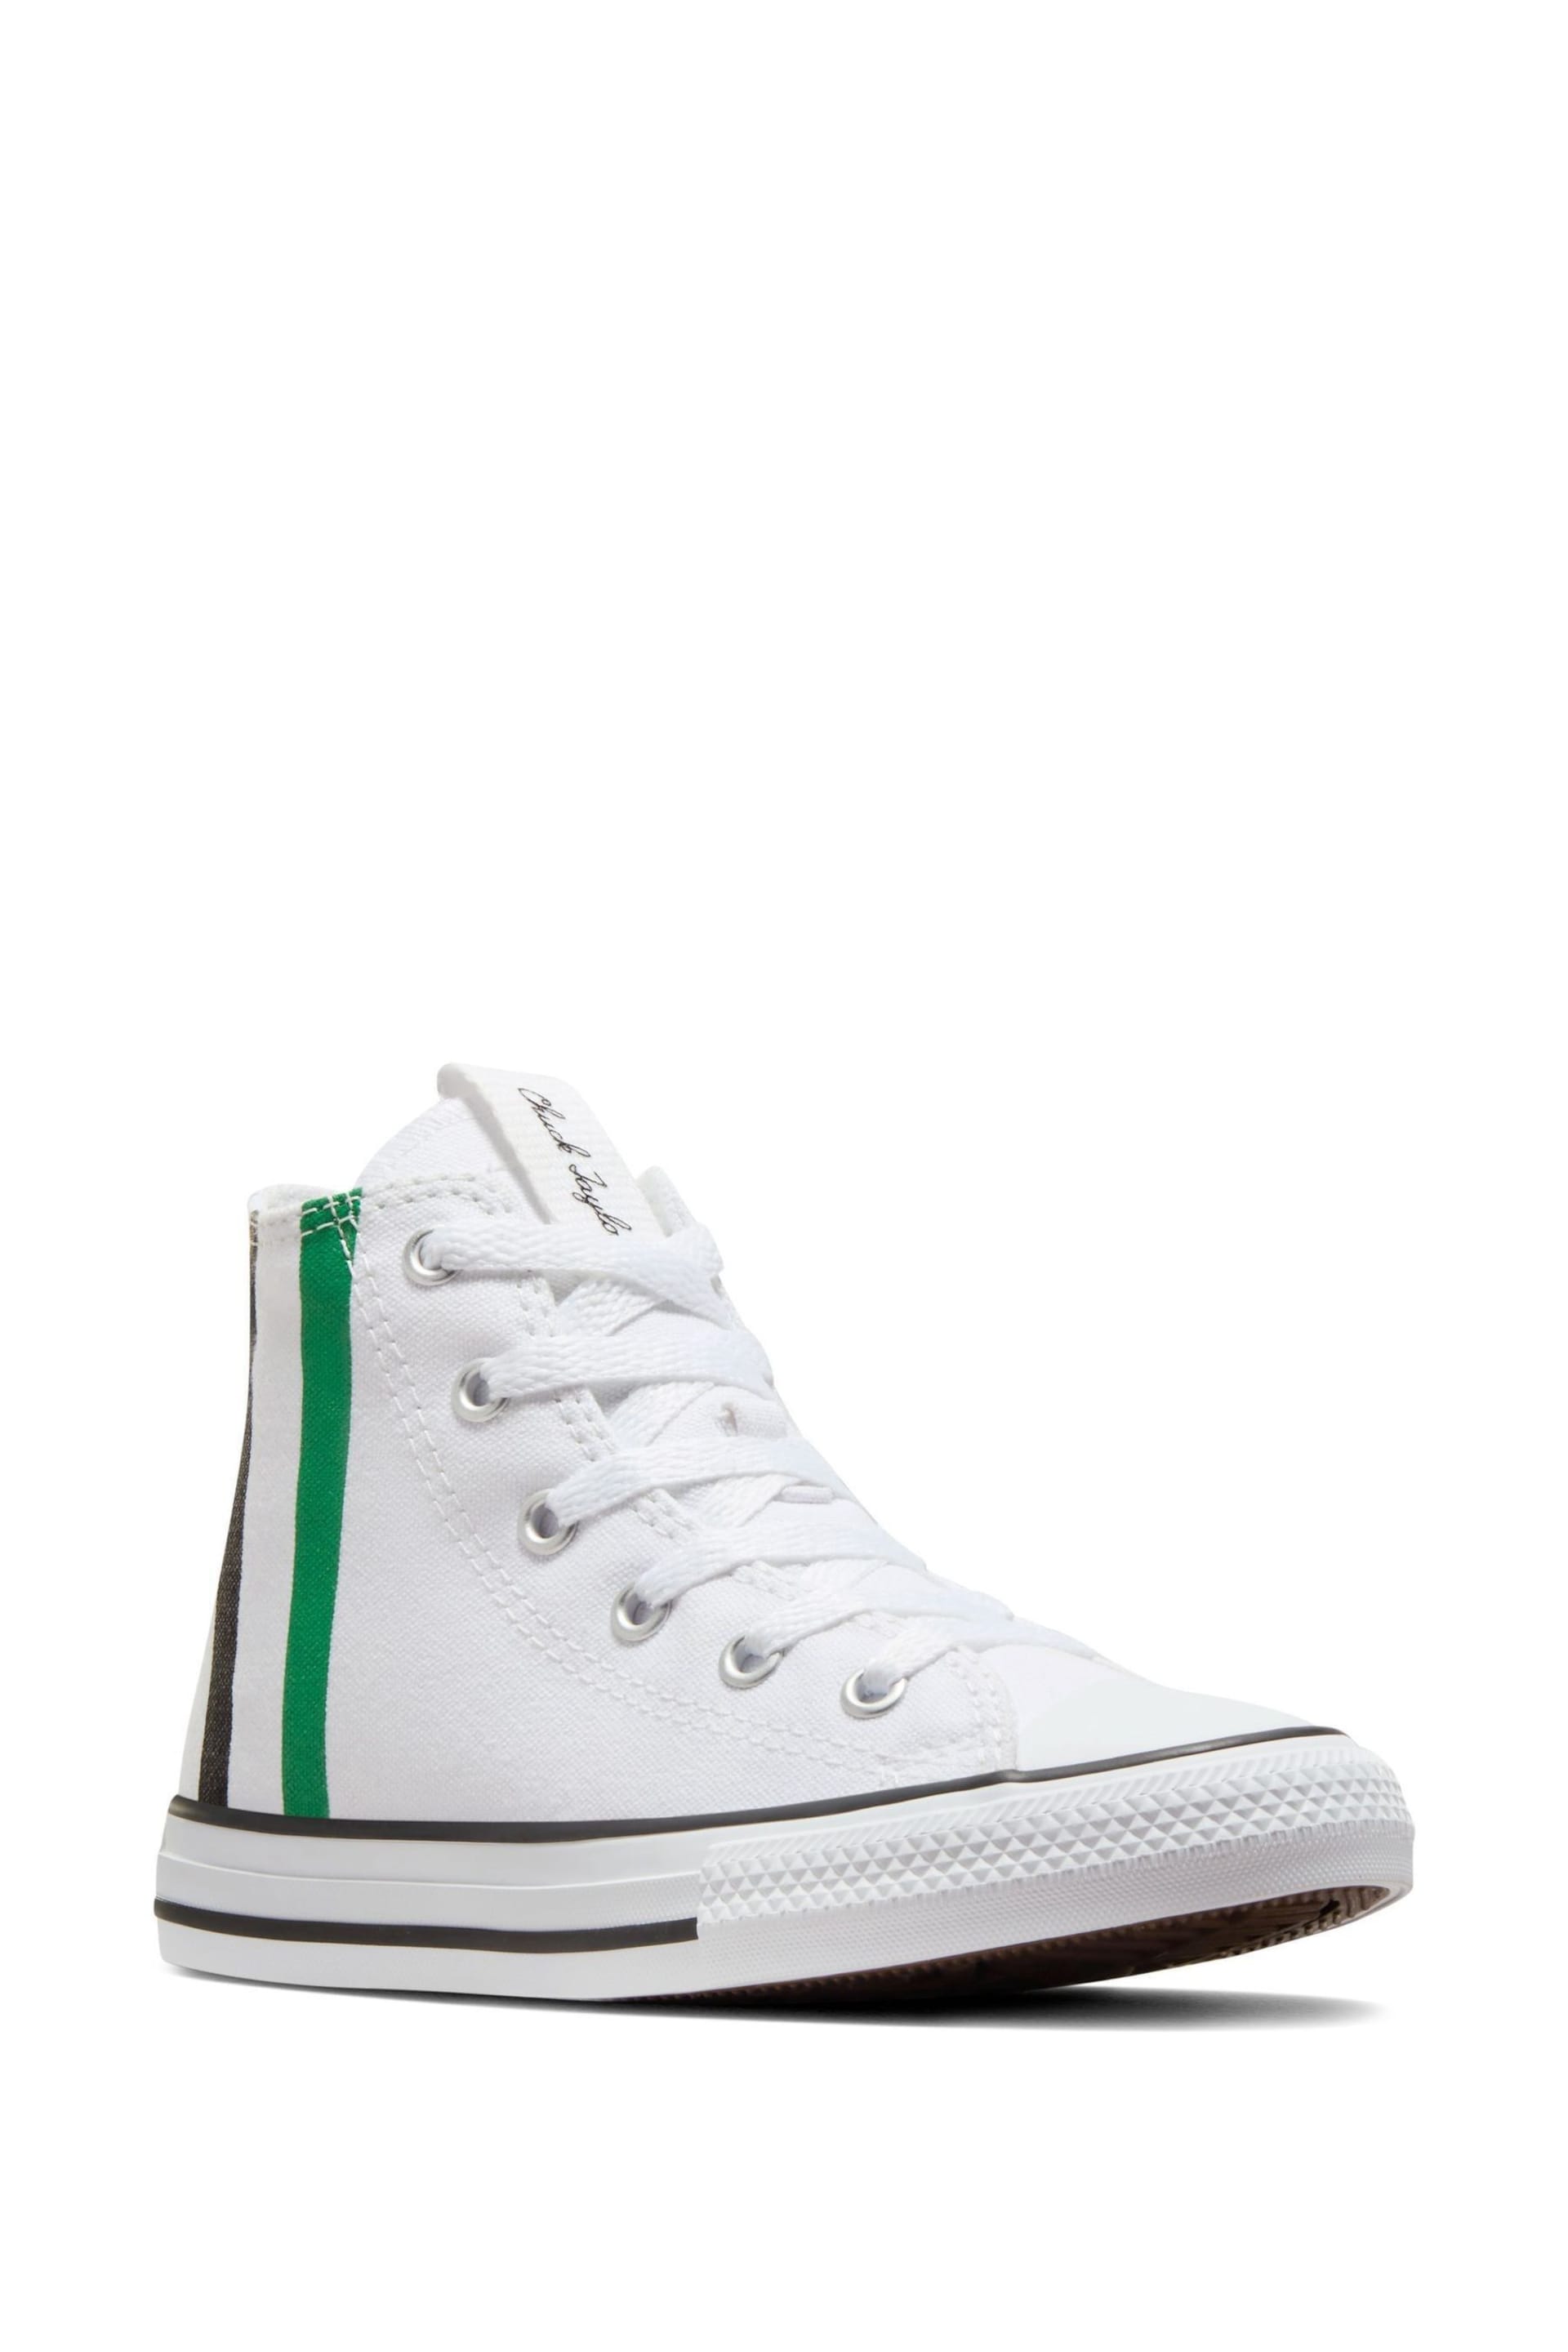 Converse Green Junior Chuck Taylor All Star Trainers - Image 6 of 11